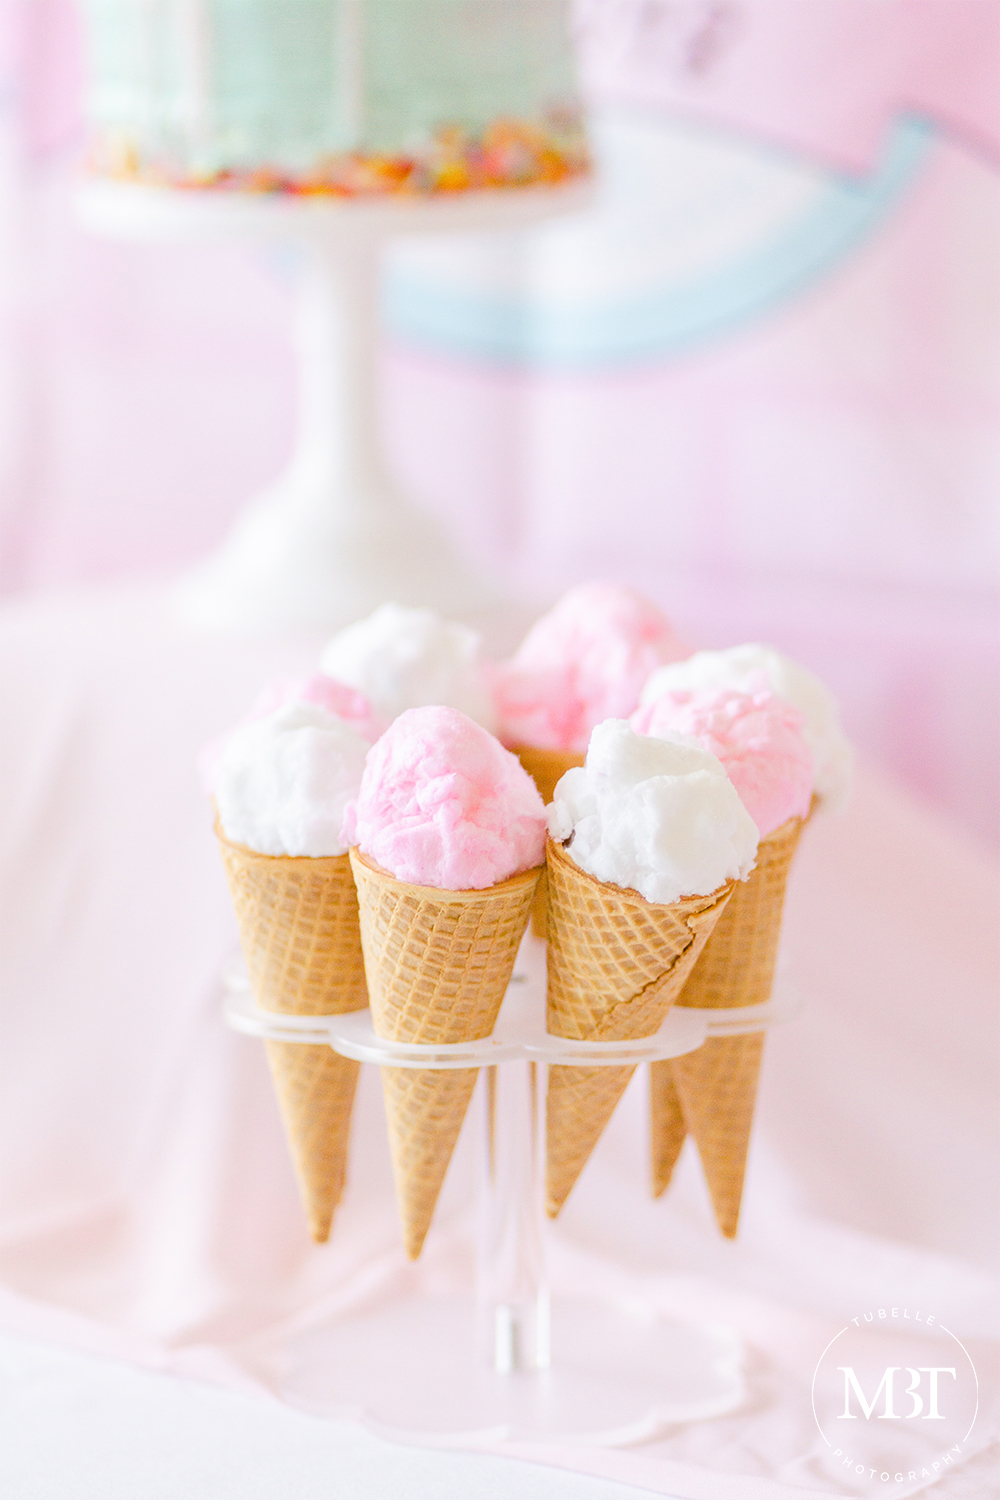 ice cream themed party, details - cotton candy, in Arlington, Virginia, taken by 
Washington, DC event photographer